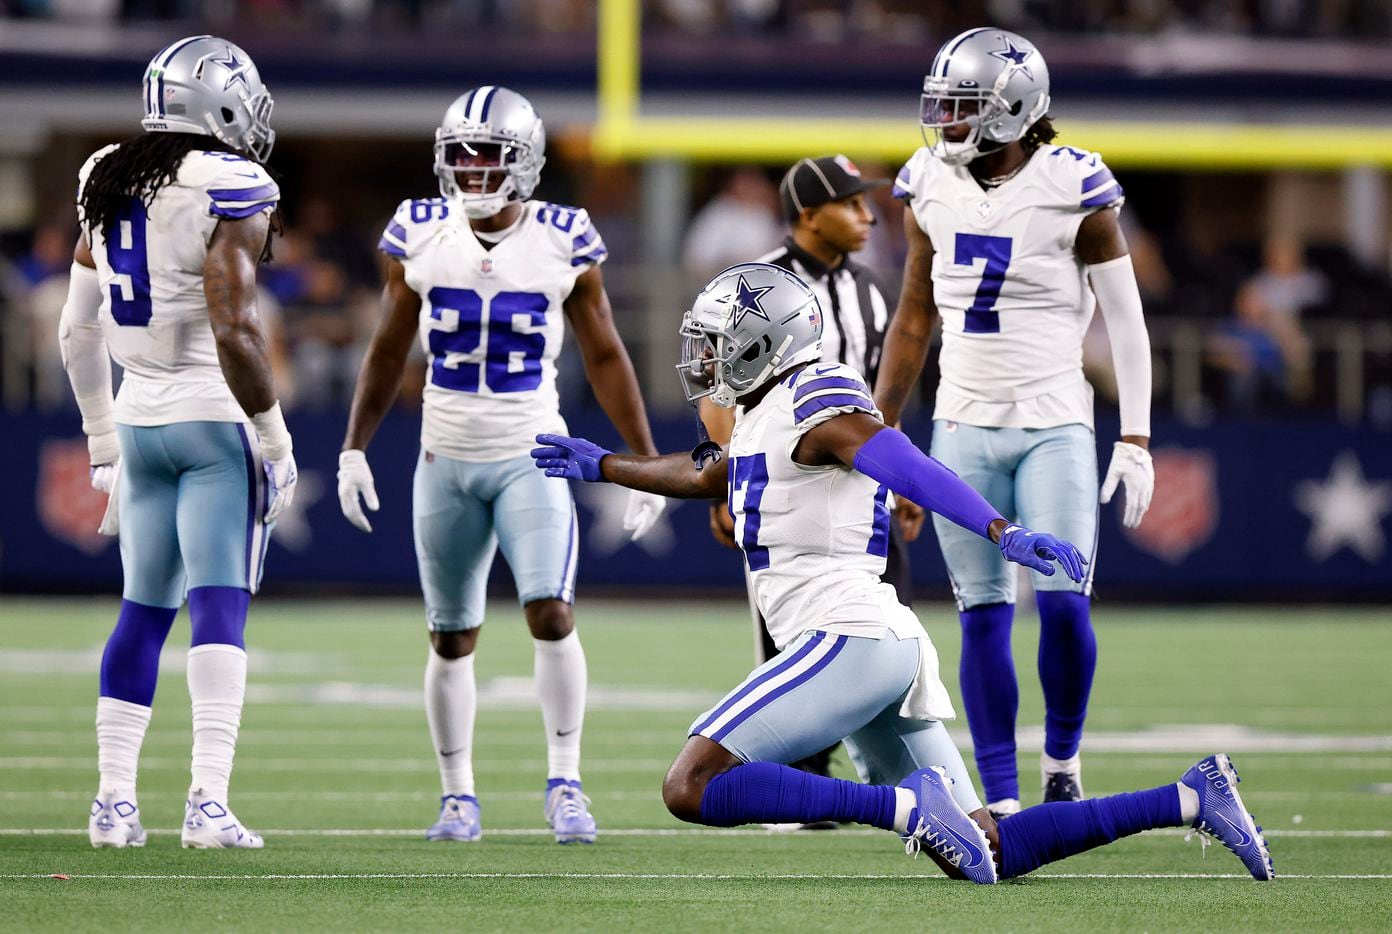 Dallas Cowboys safety Jayron Kearse (27) struts off the field after their big stop of the Philadelphia Eagles offense in the fourth quarter at AT&T Stadium in Arlington, Monday, September 27, 2021. The Cowboys won, 41-21. (Tom Fox/The Dallas Morning News)